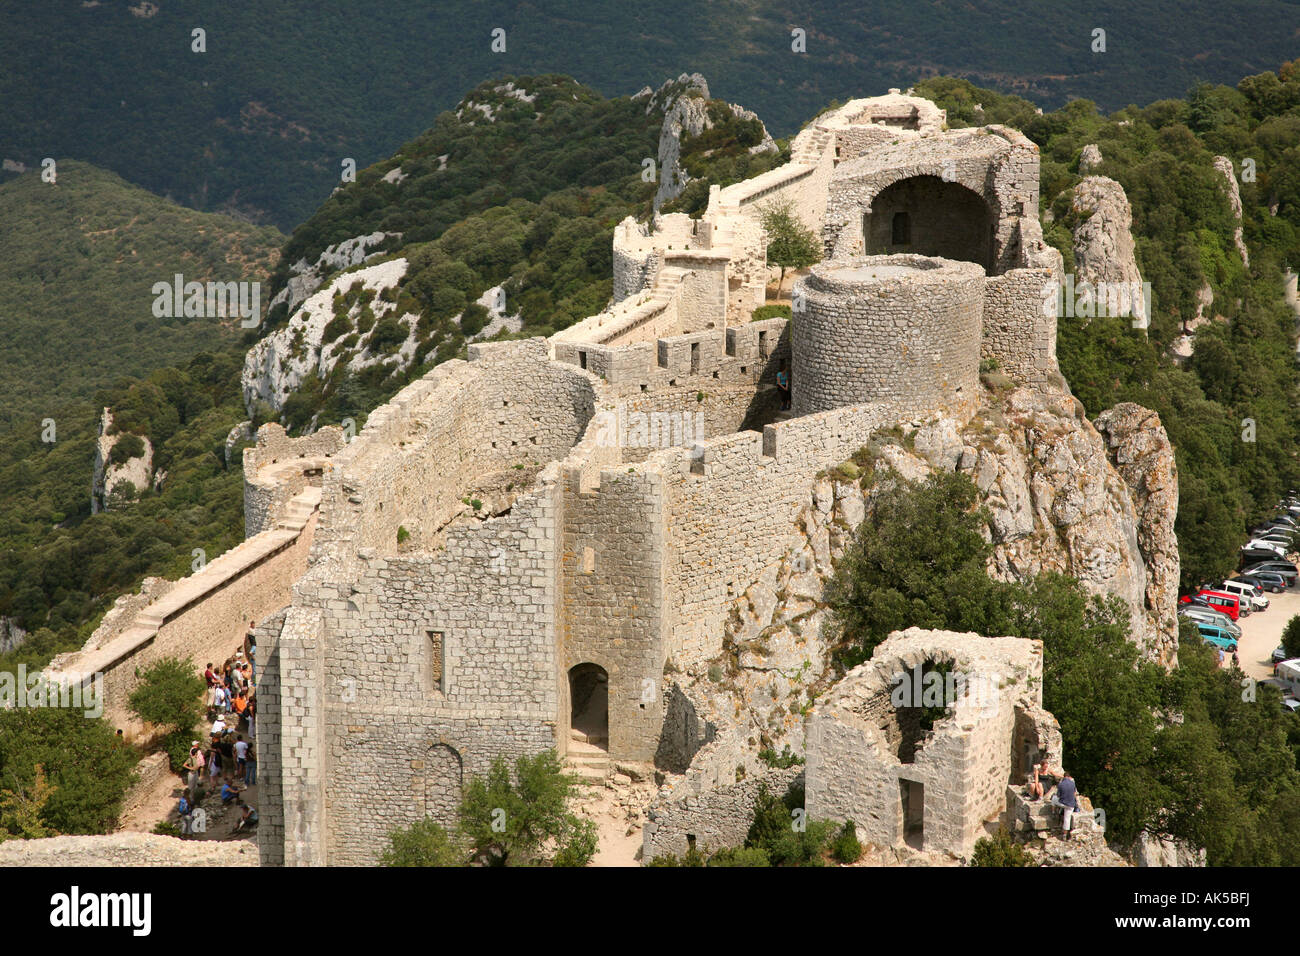 The ruined fortress of Peyrepertuse Stock Photo